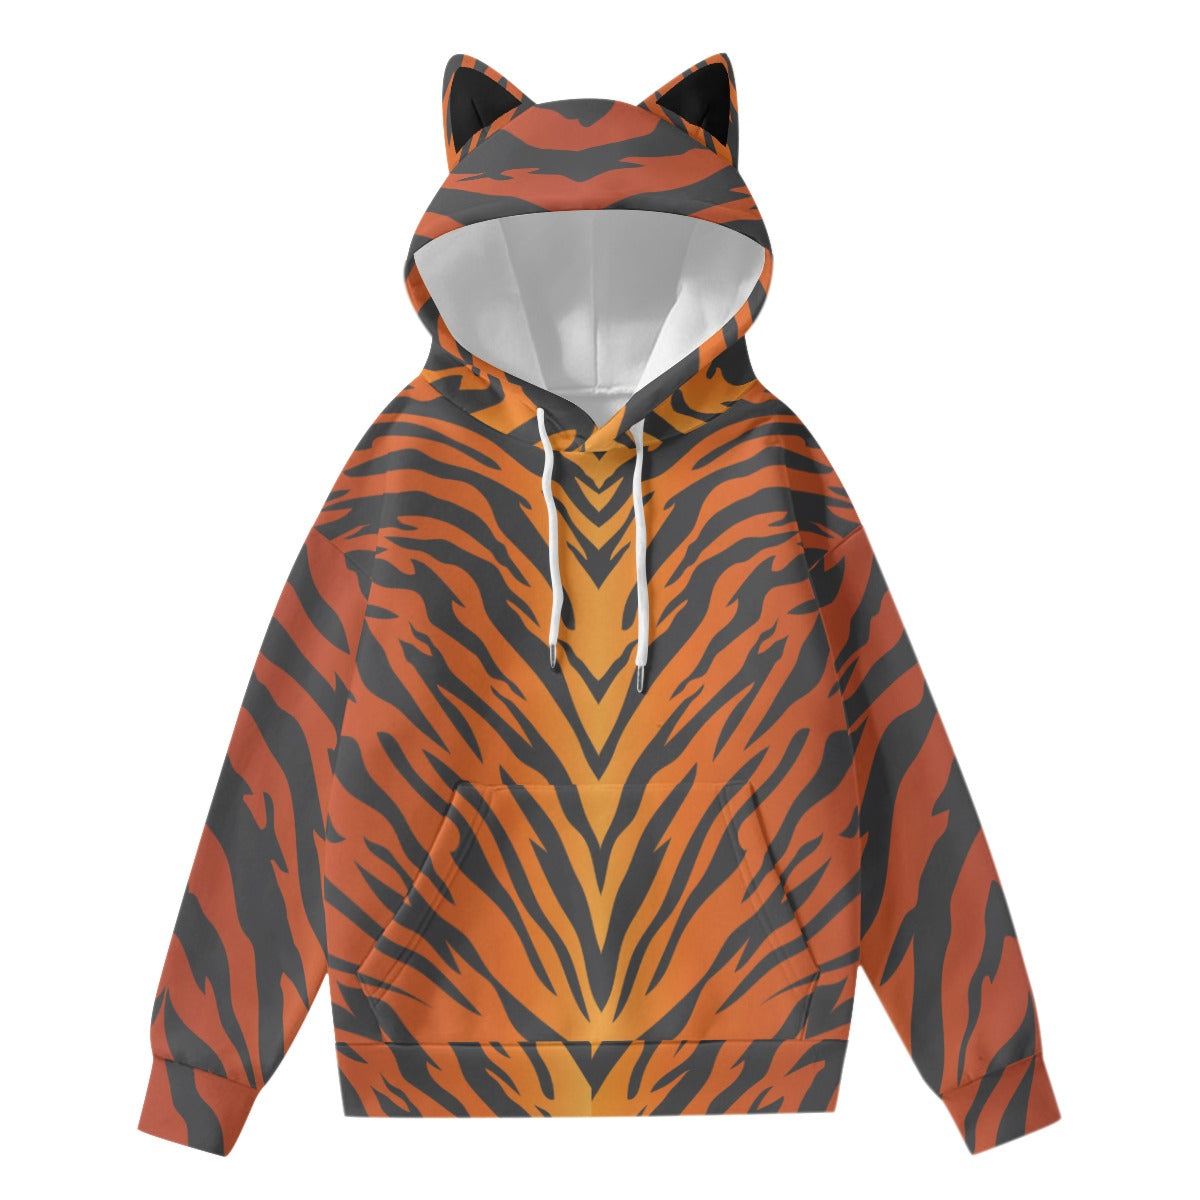 Tiger Print Hoodie With Decorative Ears Adult